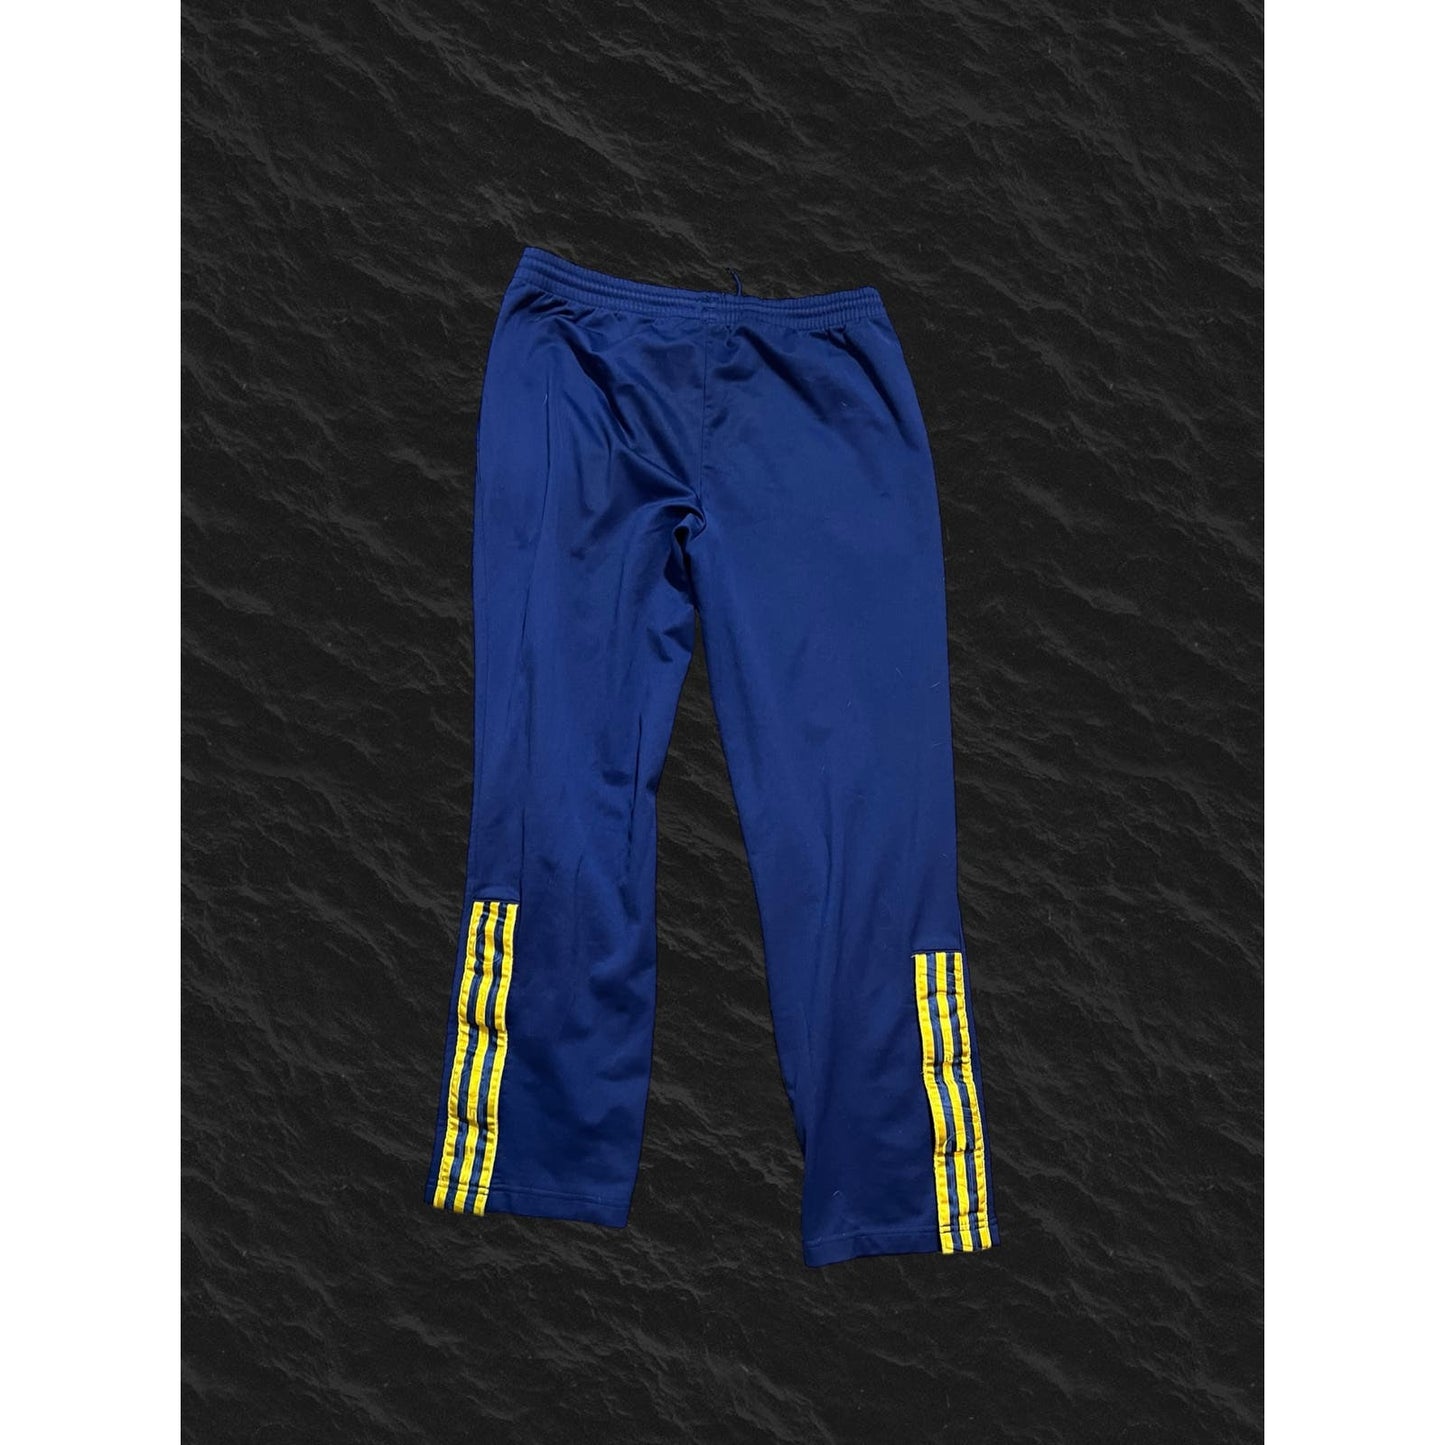 Blue yellow stripes Adidas button joggers y2k